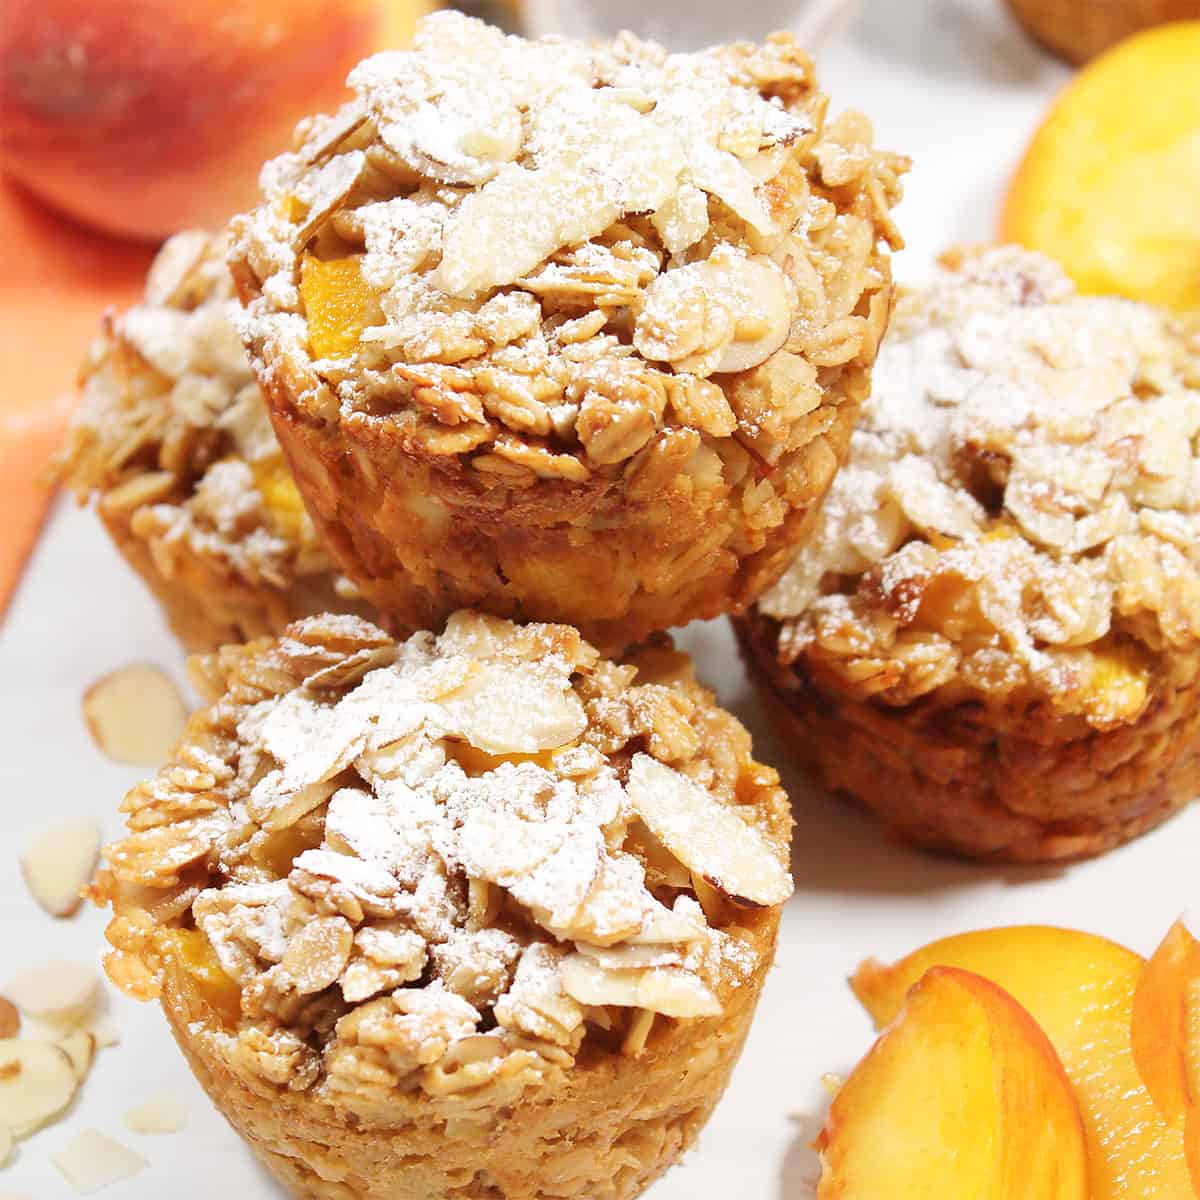 Stack of oatmeal muffins with almonds.